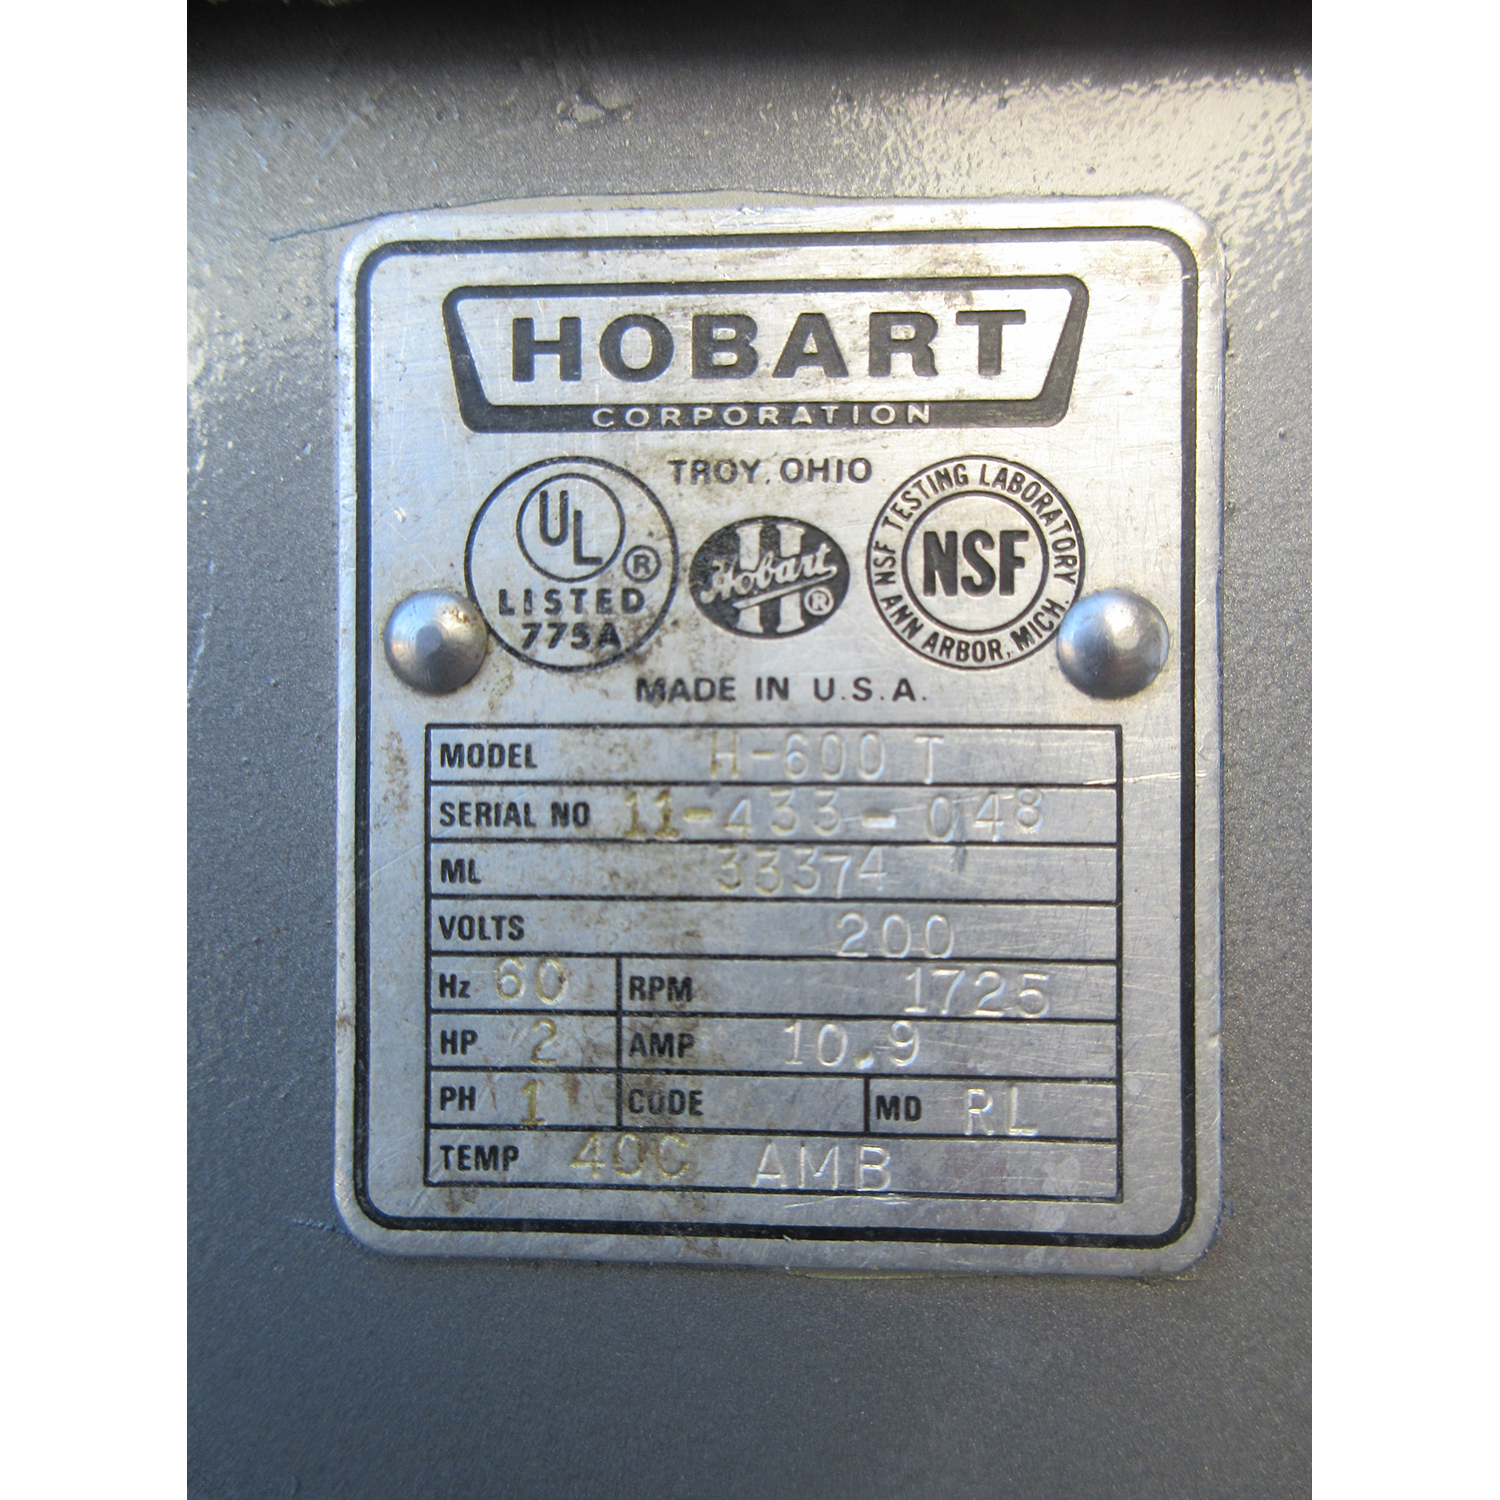 Hobart H-600T Mixer 60 Qt, Used Excellent Condition image 3